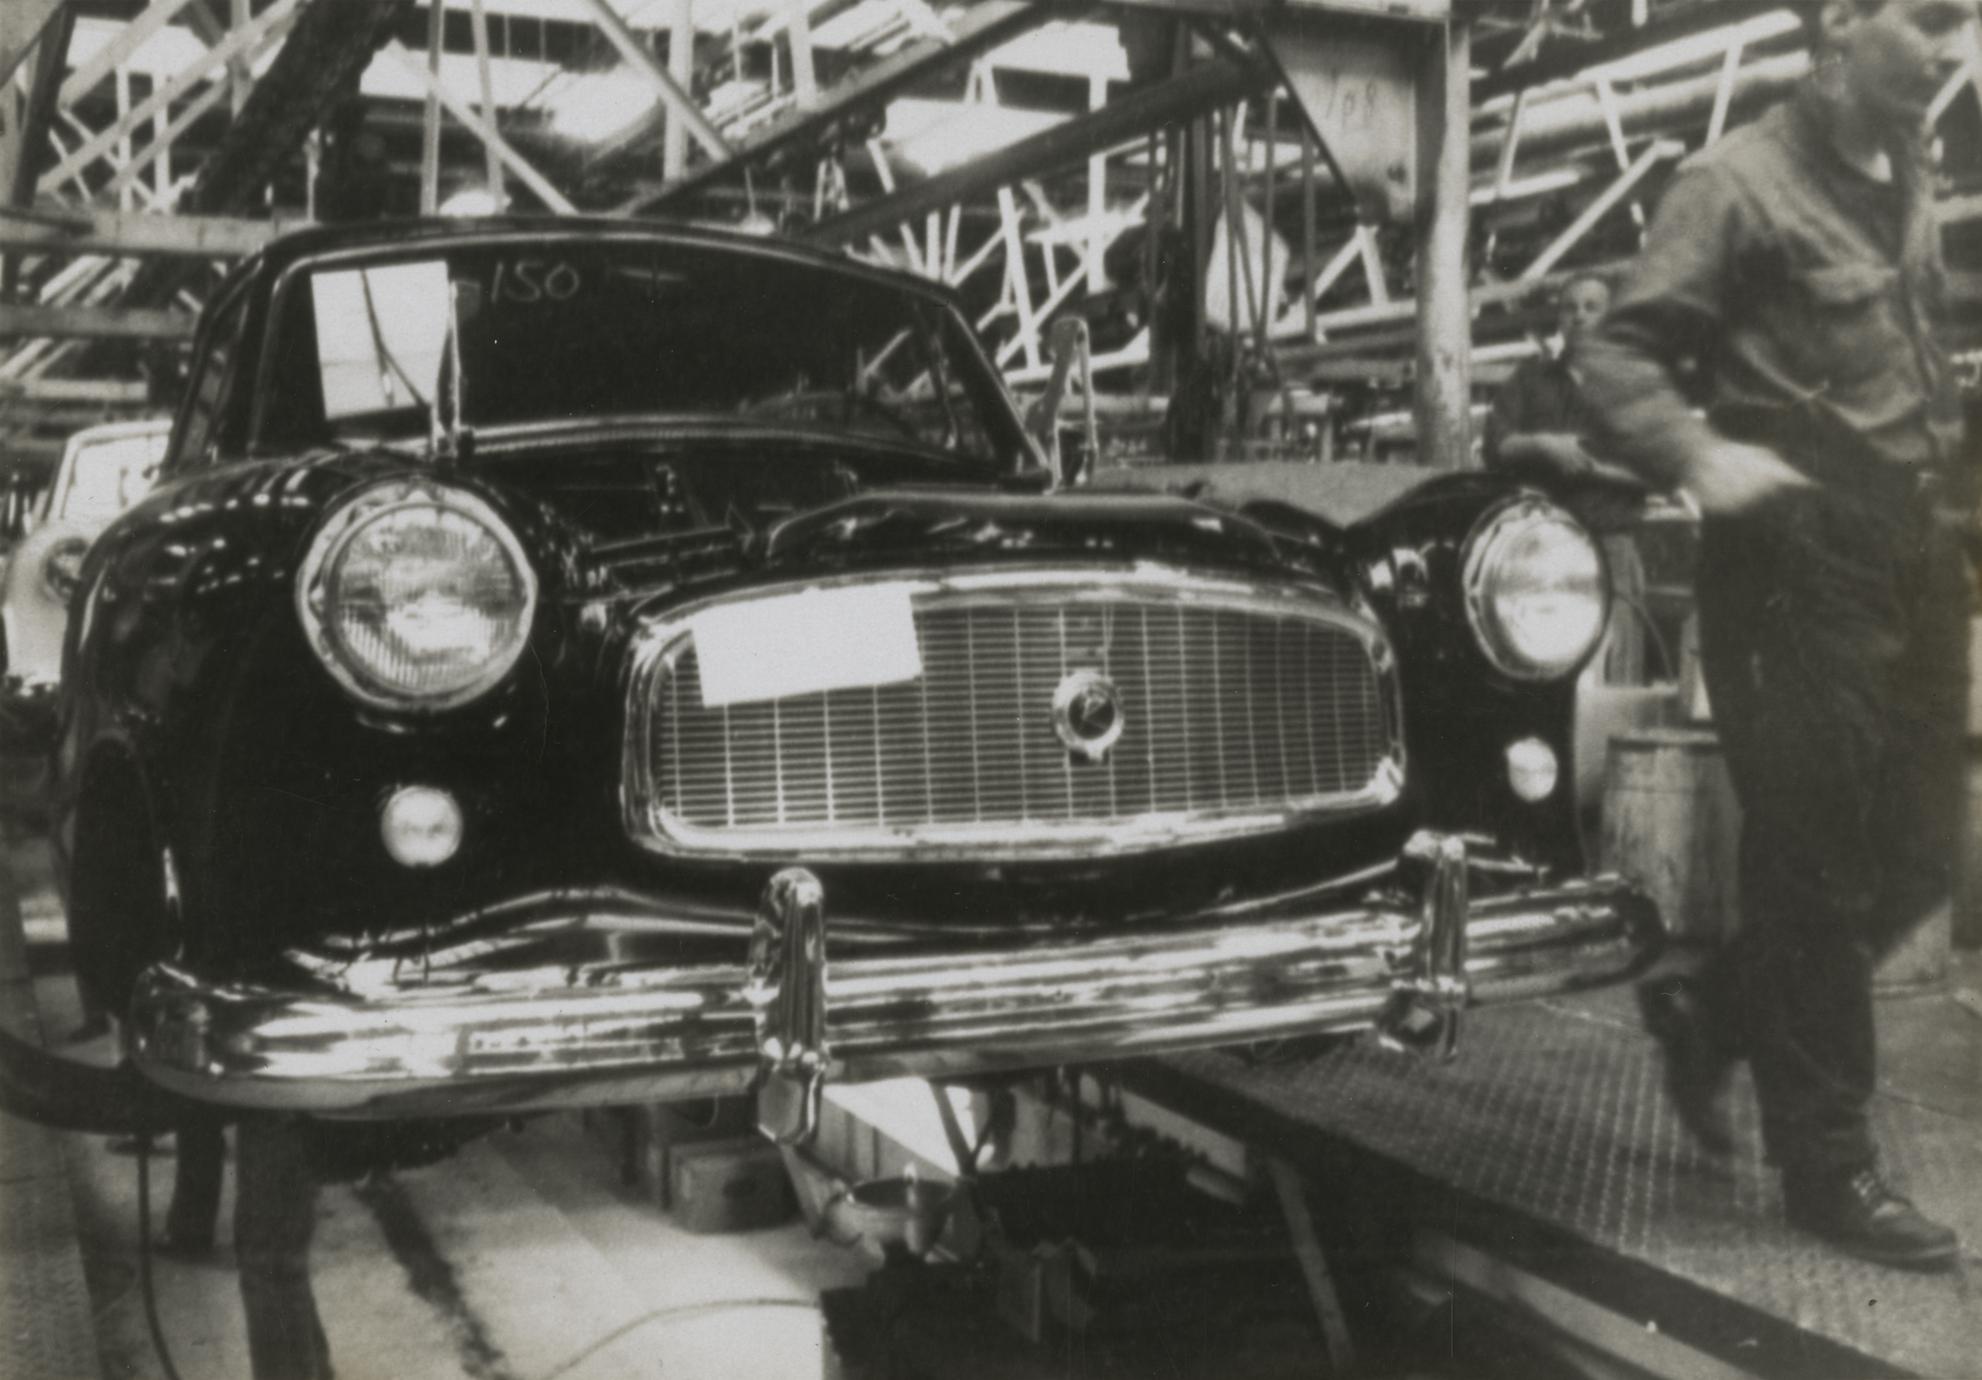 American Motors Corporation Rambler American on the assembly line